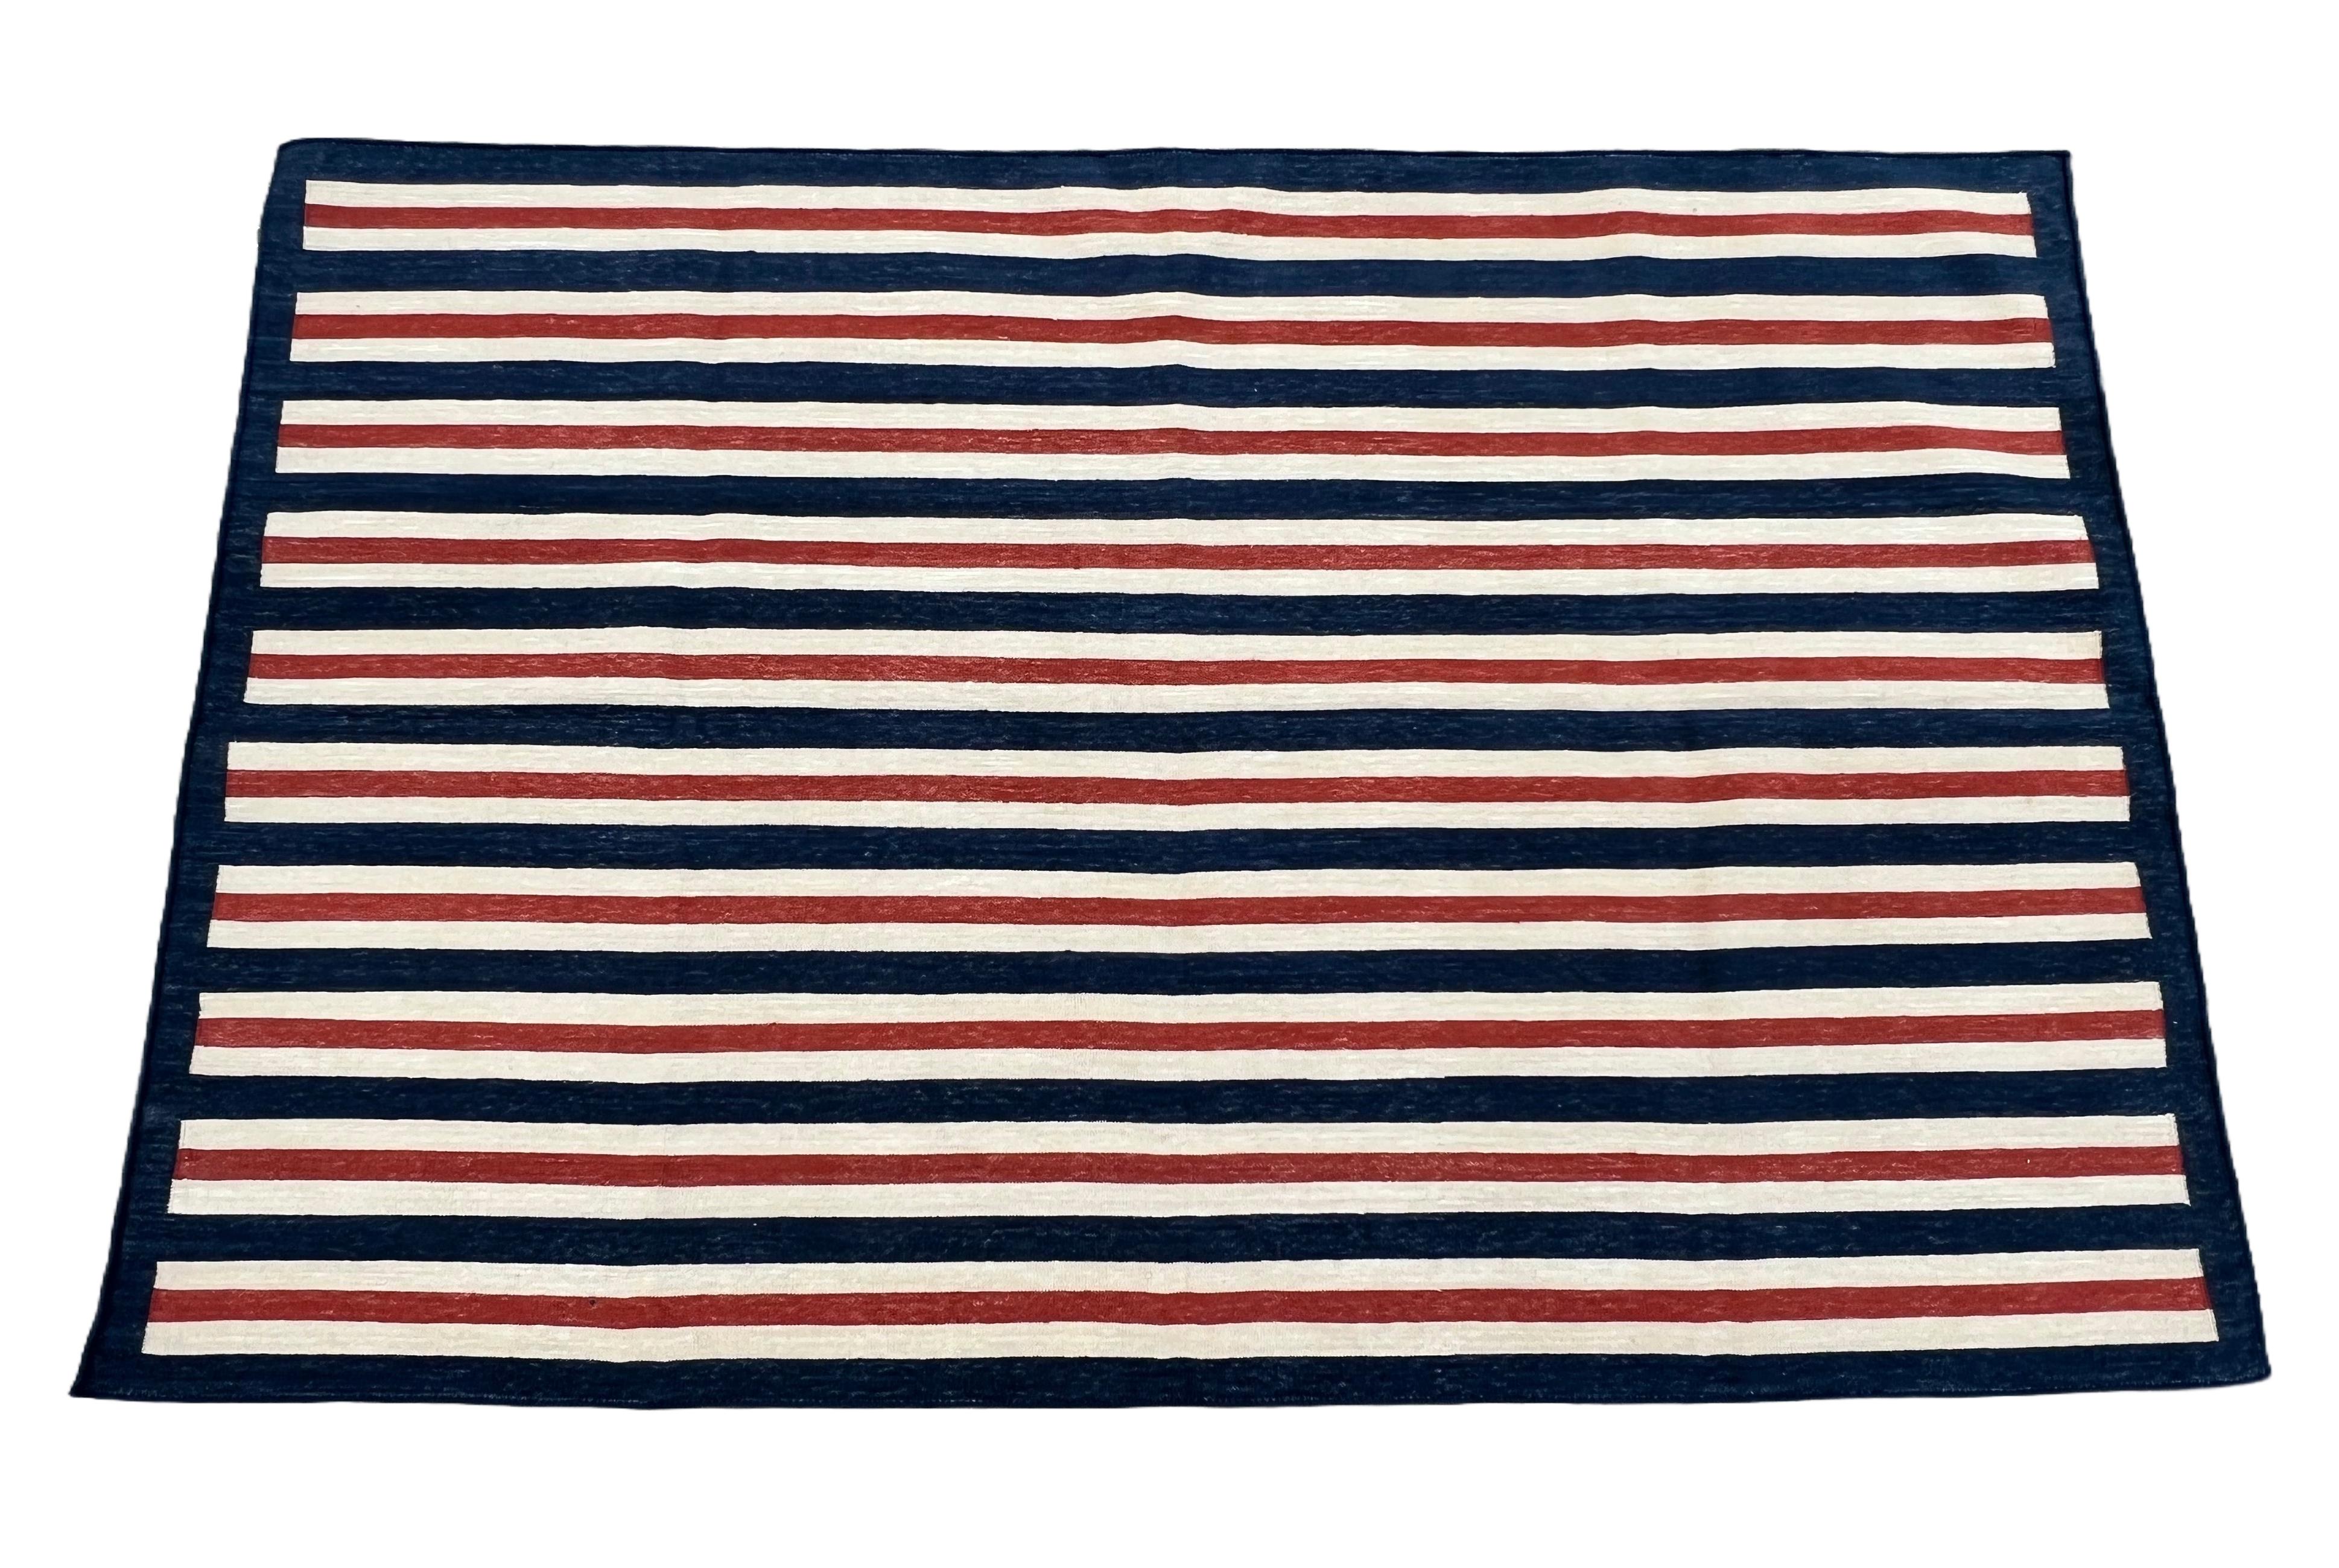 Mid-Century Modern Handmade Cotton Area Flat Weave Rug, 3x5 Blue And Red Striped Indian Dhurrie Rug For Sale